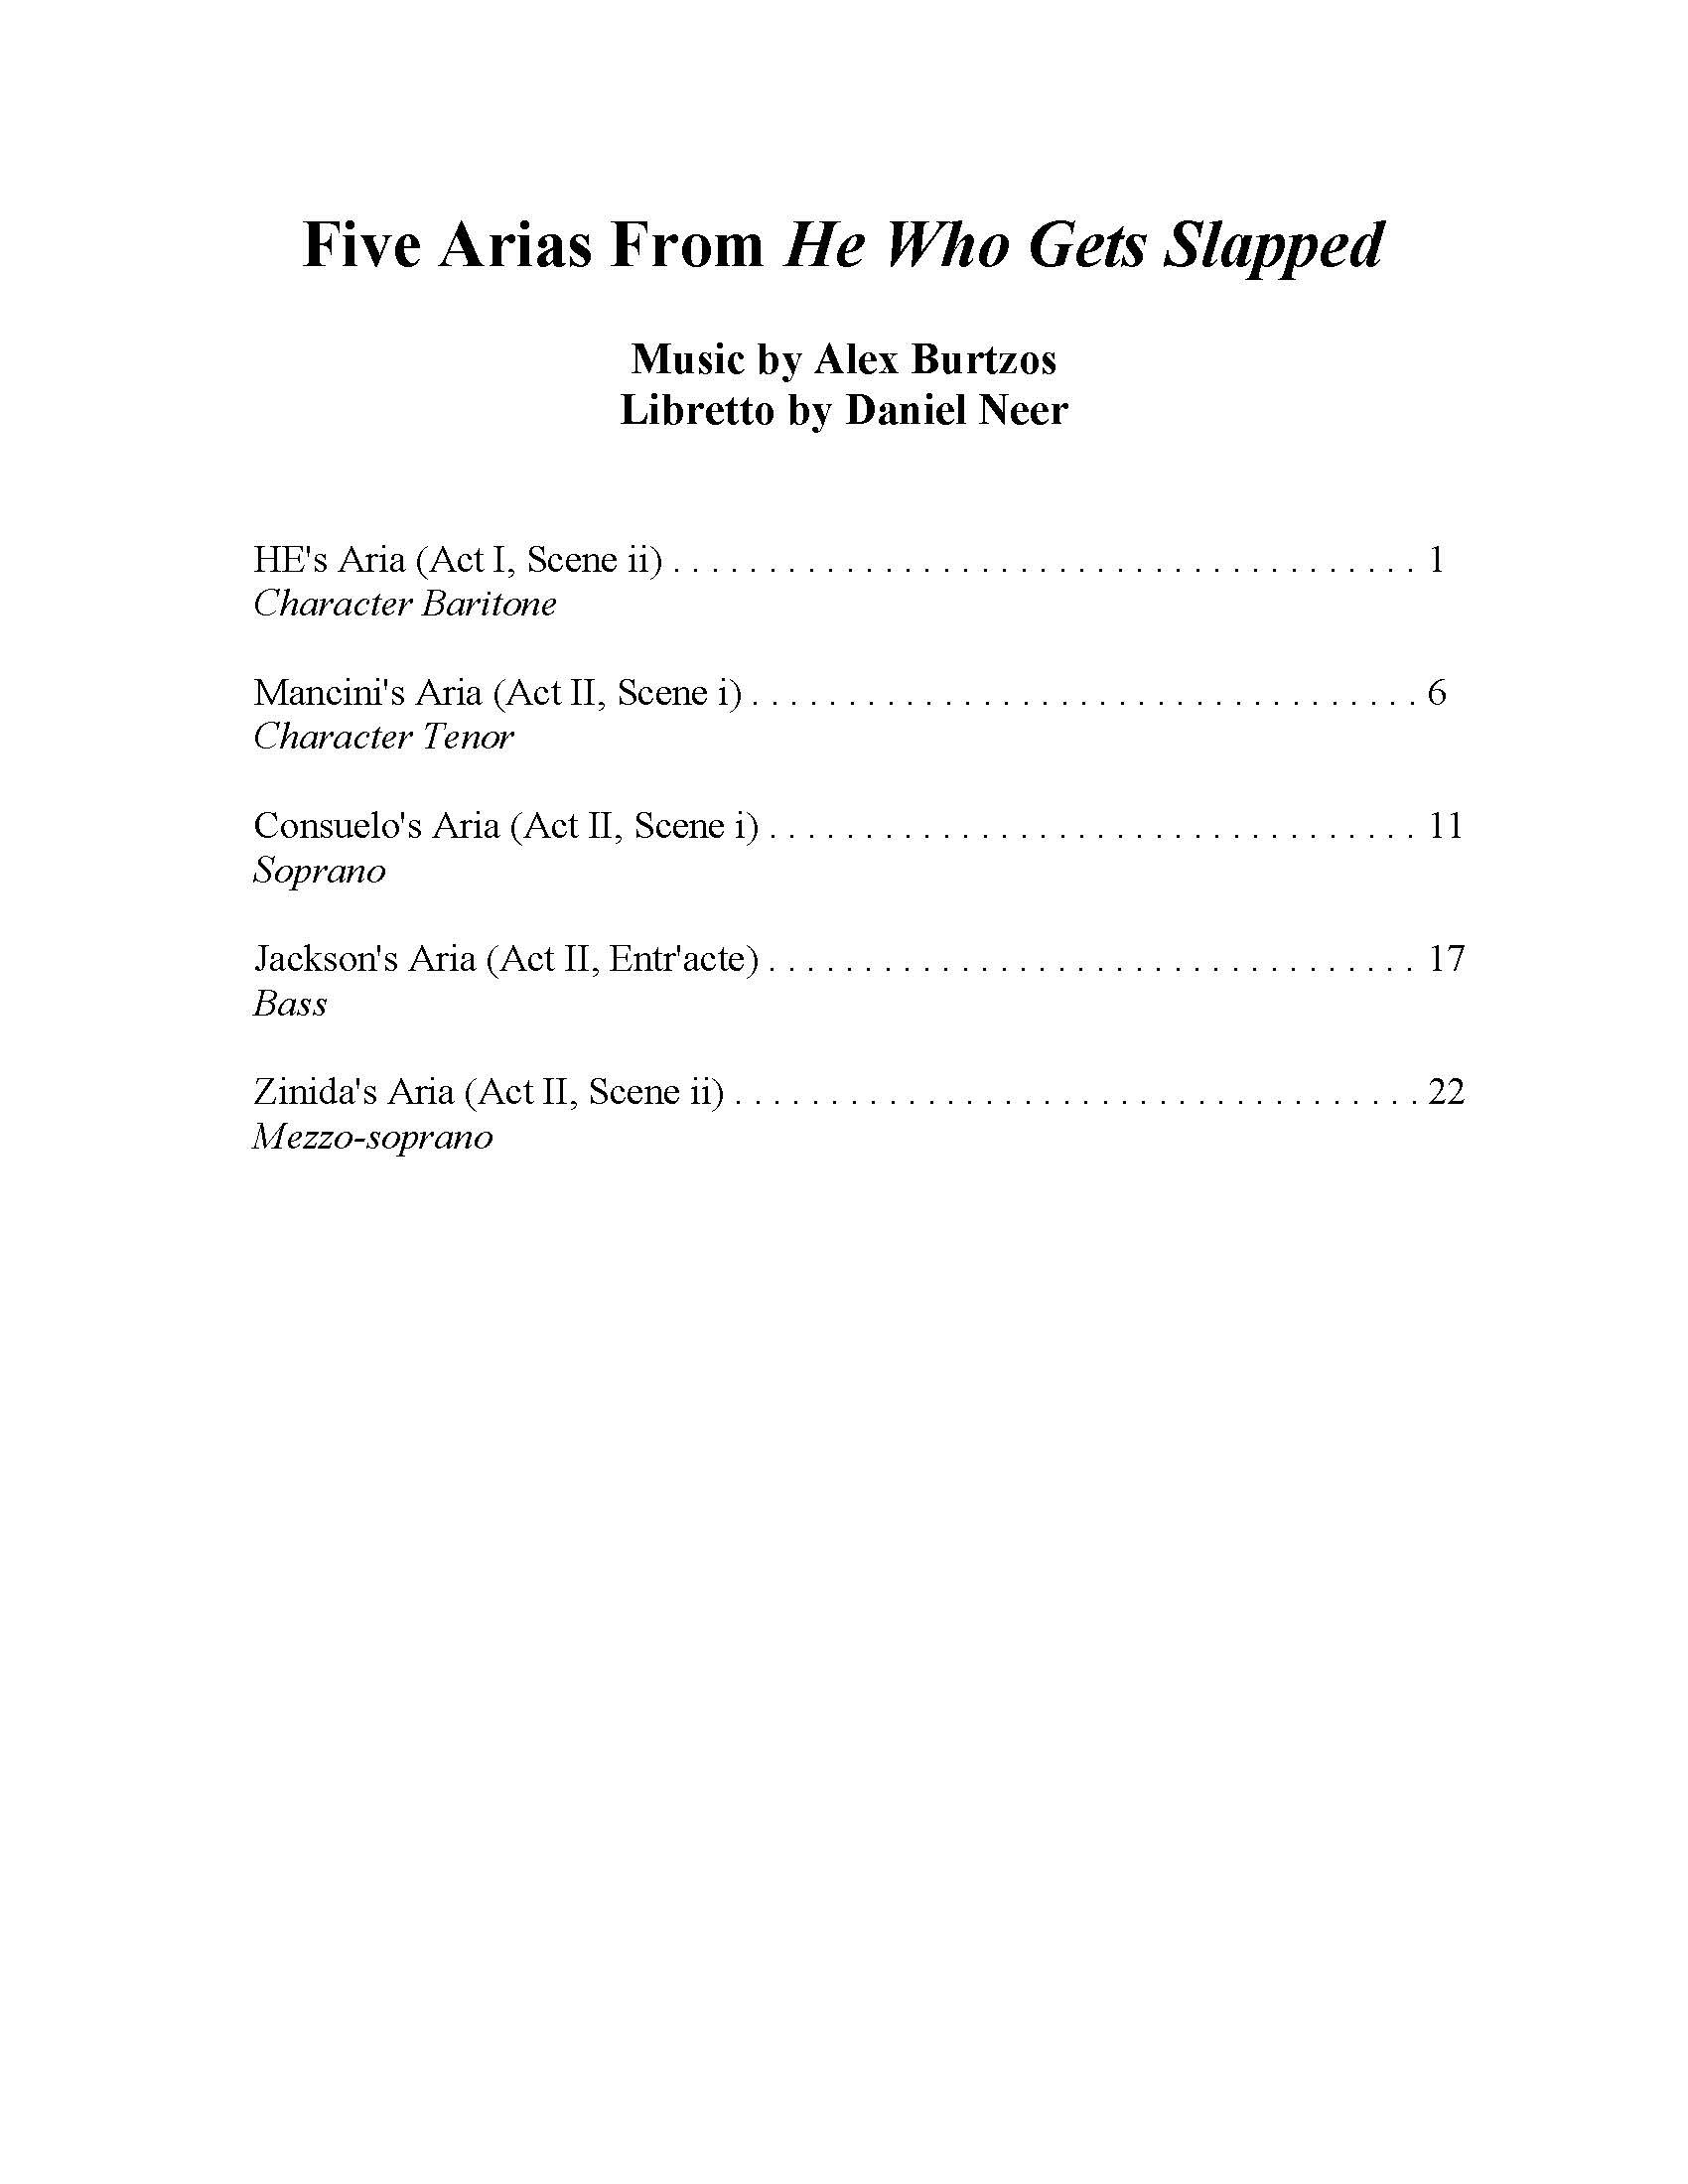 Five Arias from HWGS - Complete Score (1)_Page_03.jpg